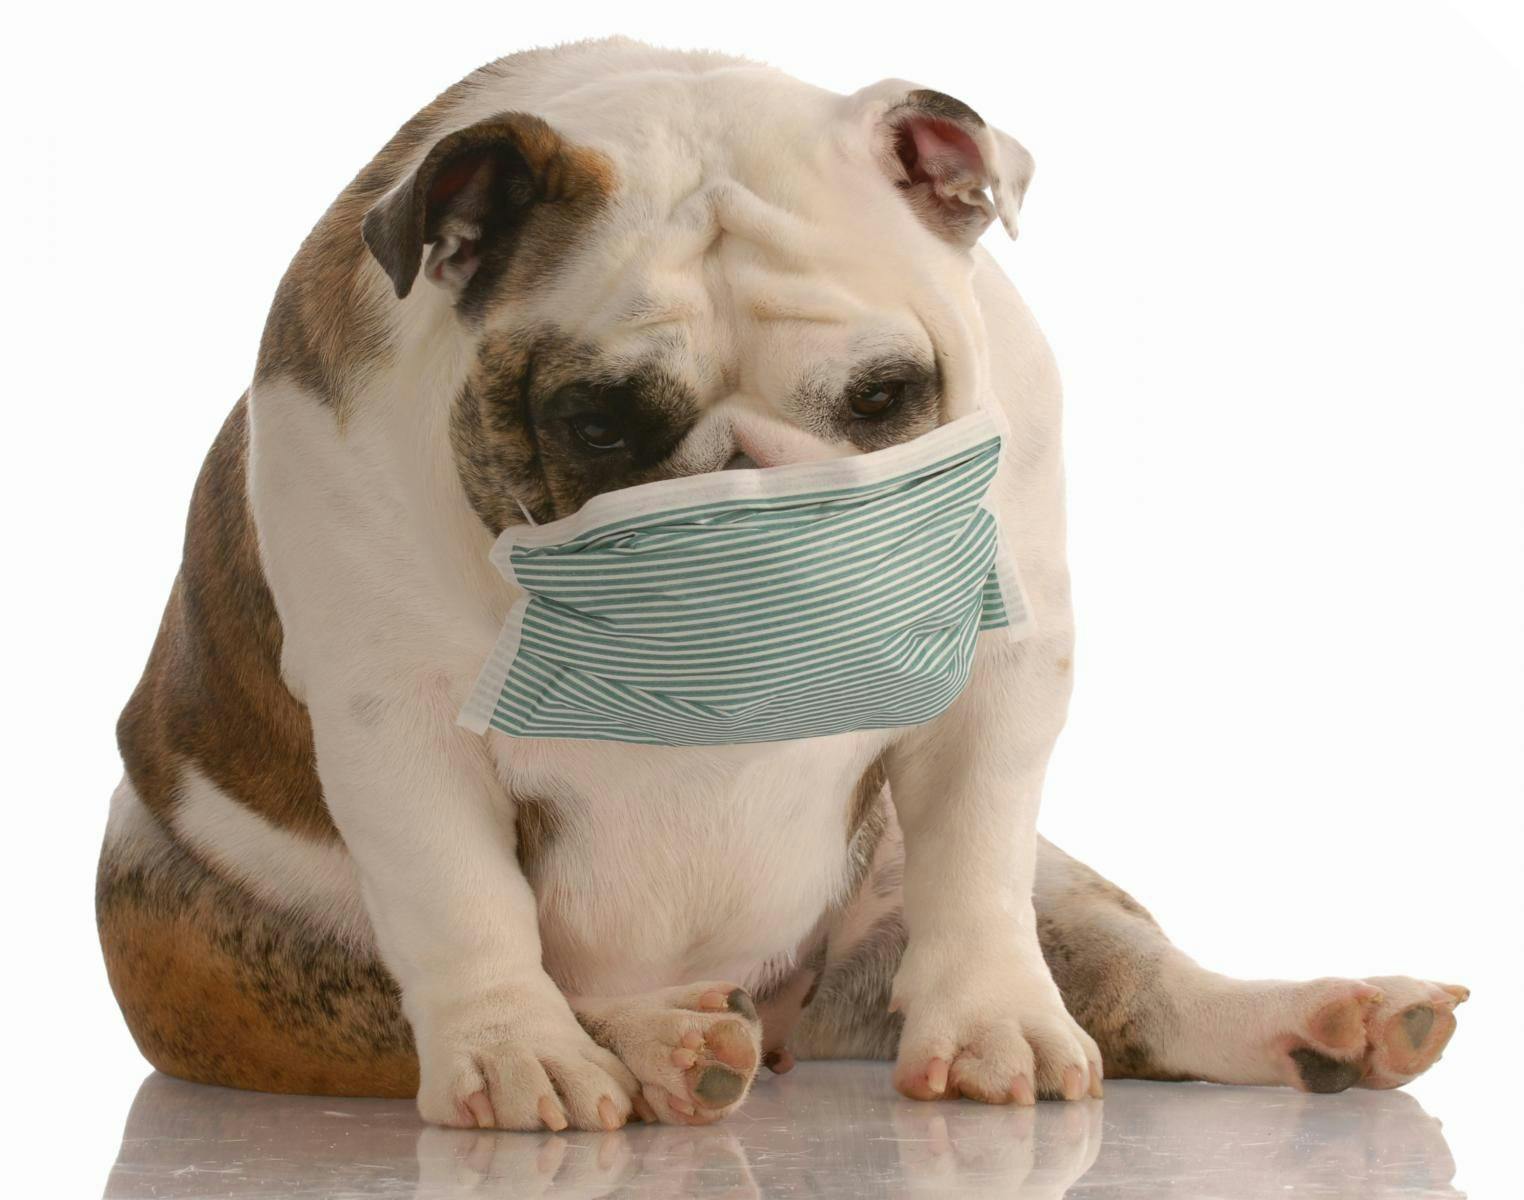 CDC Recommendations for Coronavirus Home Isolation with Pets